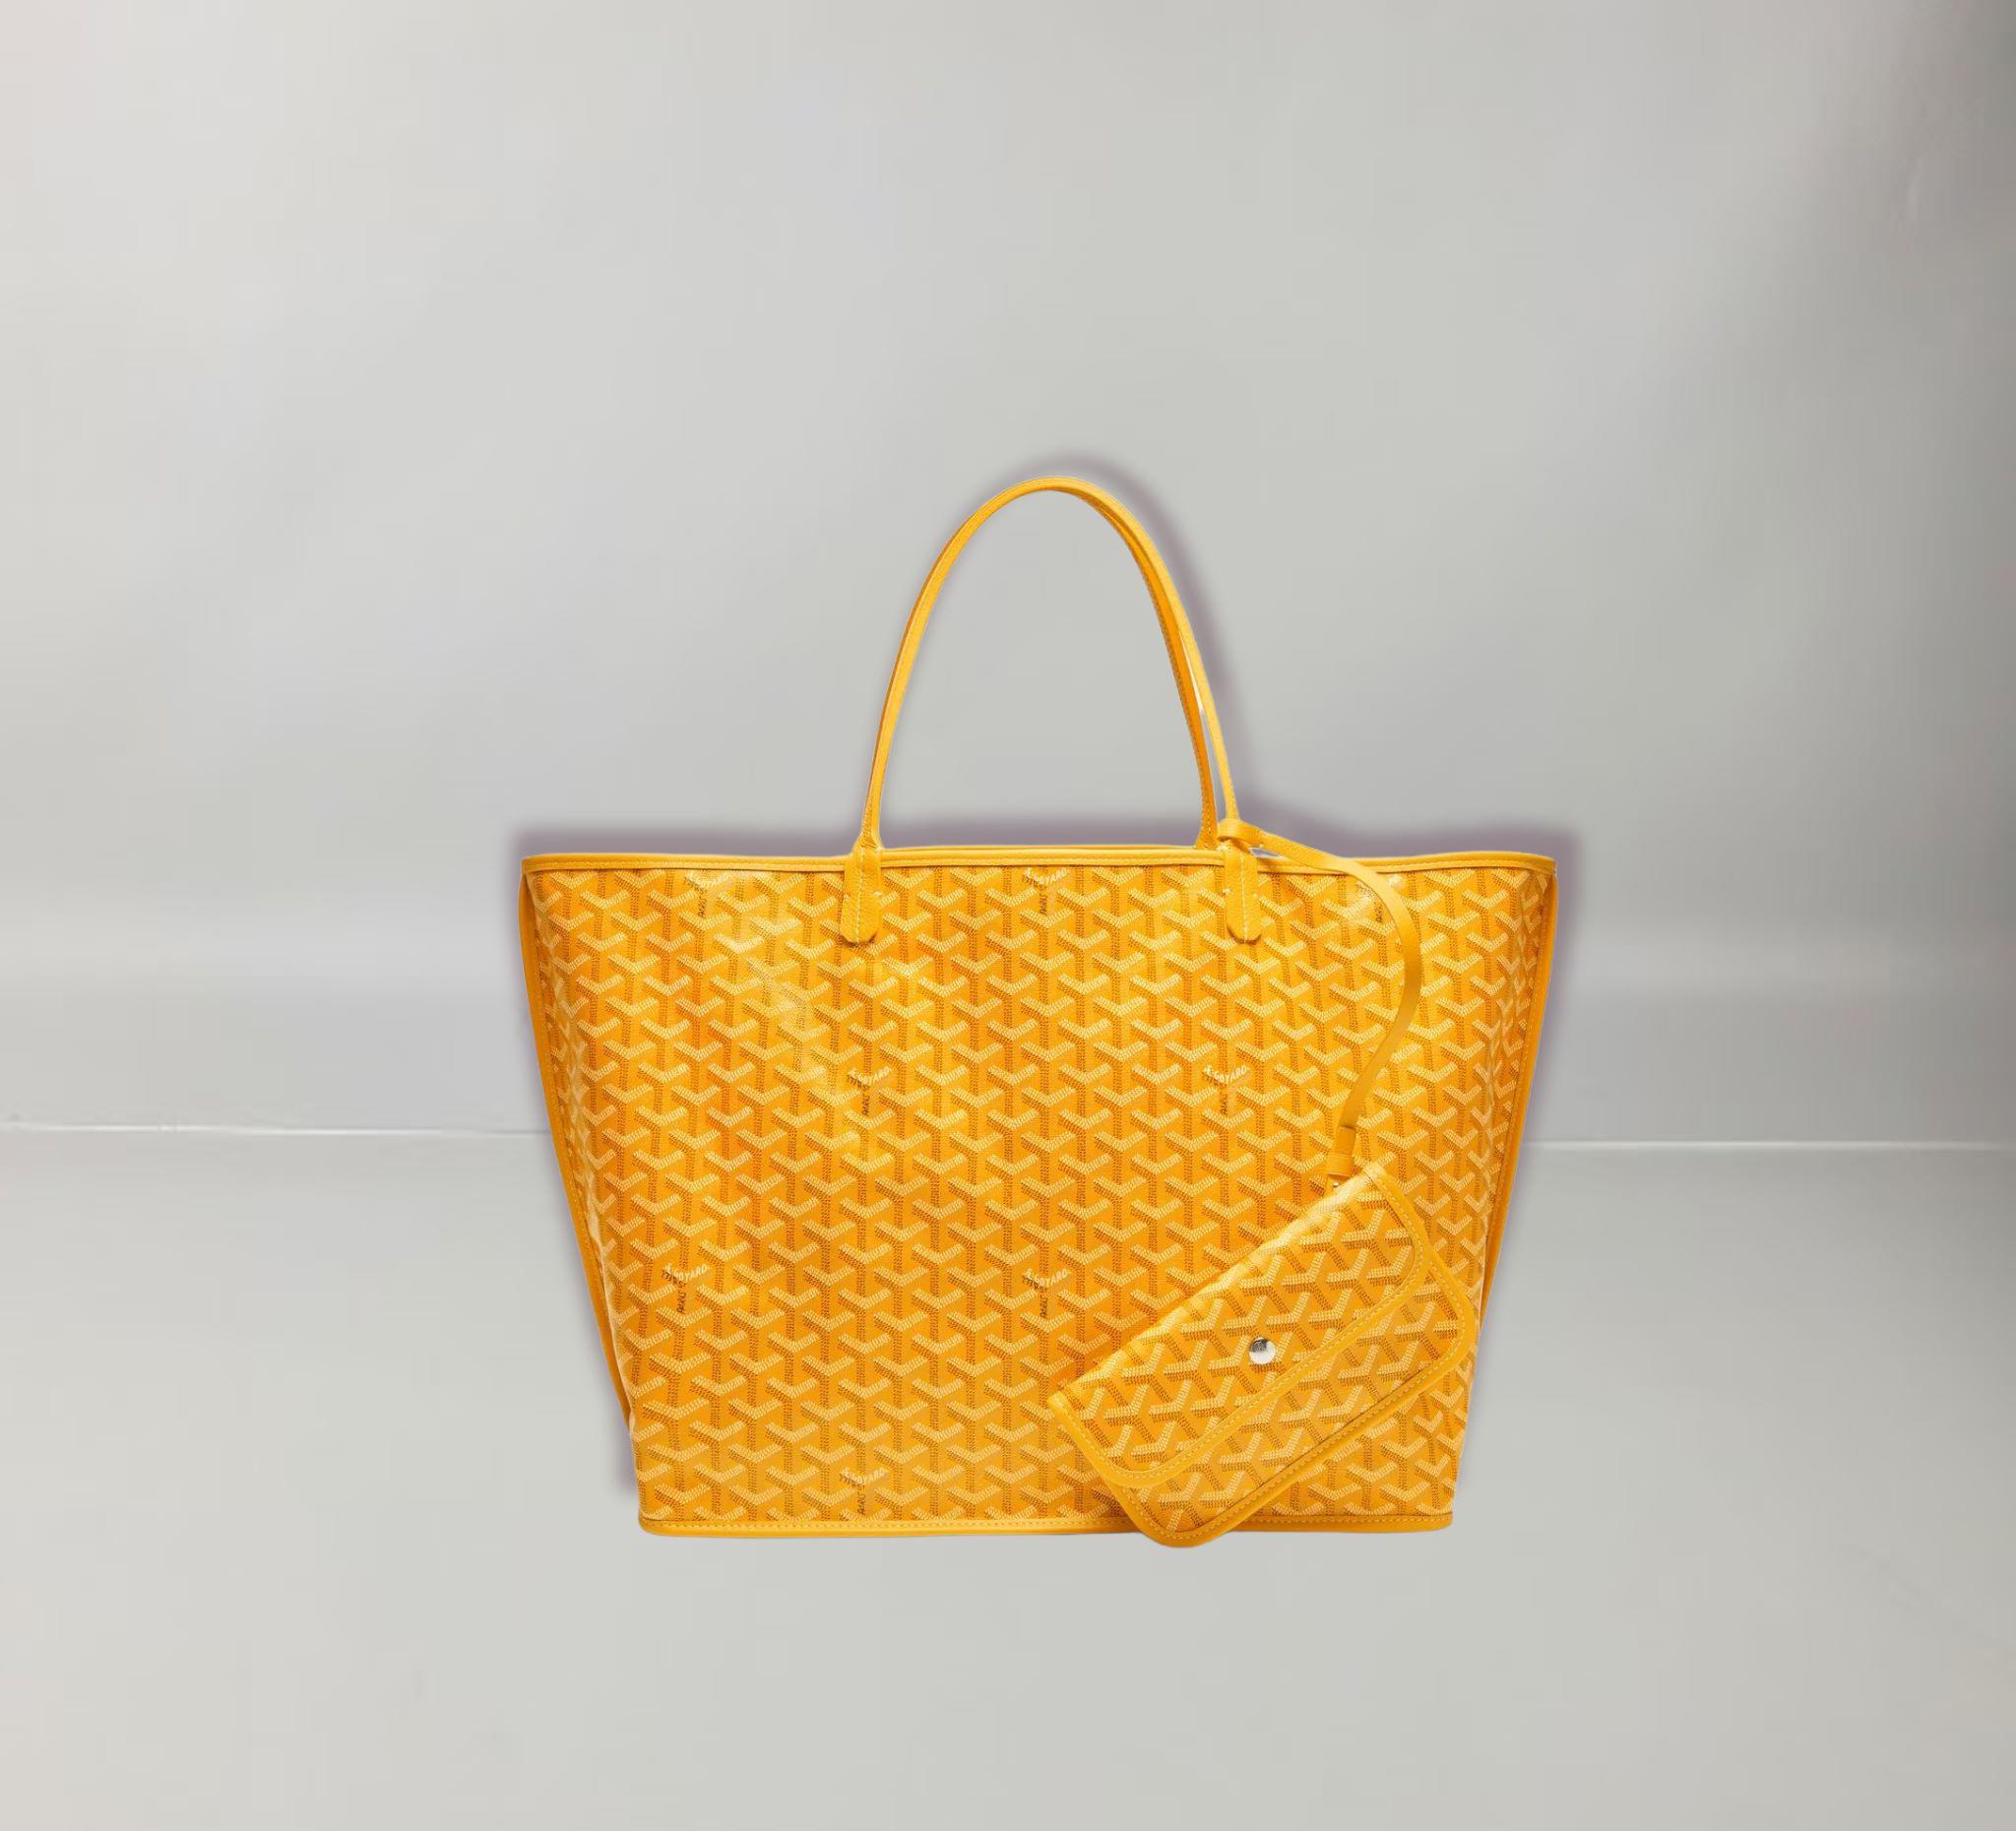 Goyard's Bag dont have cardboard box, it will  be ship with dust bag and authenticity card
The Anjou GM bag is a nod to our emblematic Saint Louis bag but in a leather version lined with Goyardine. Reversible, it has two different styles and looks.